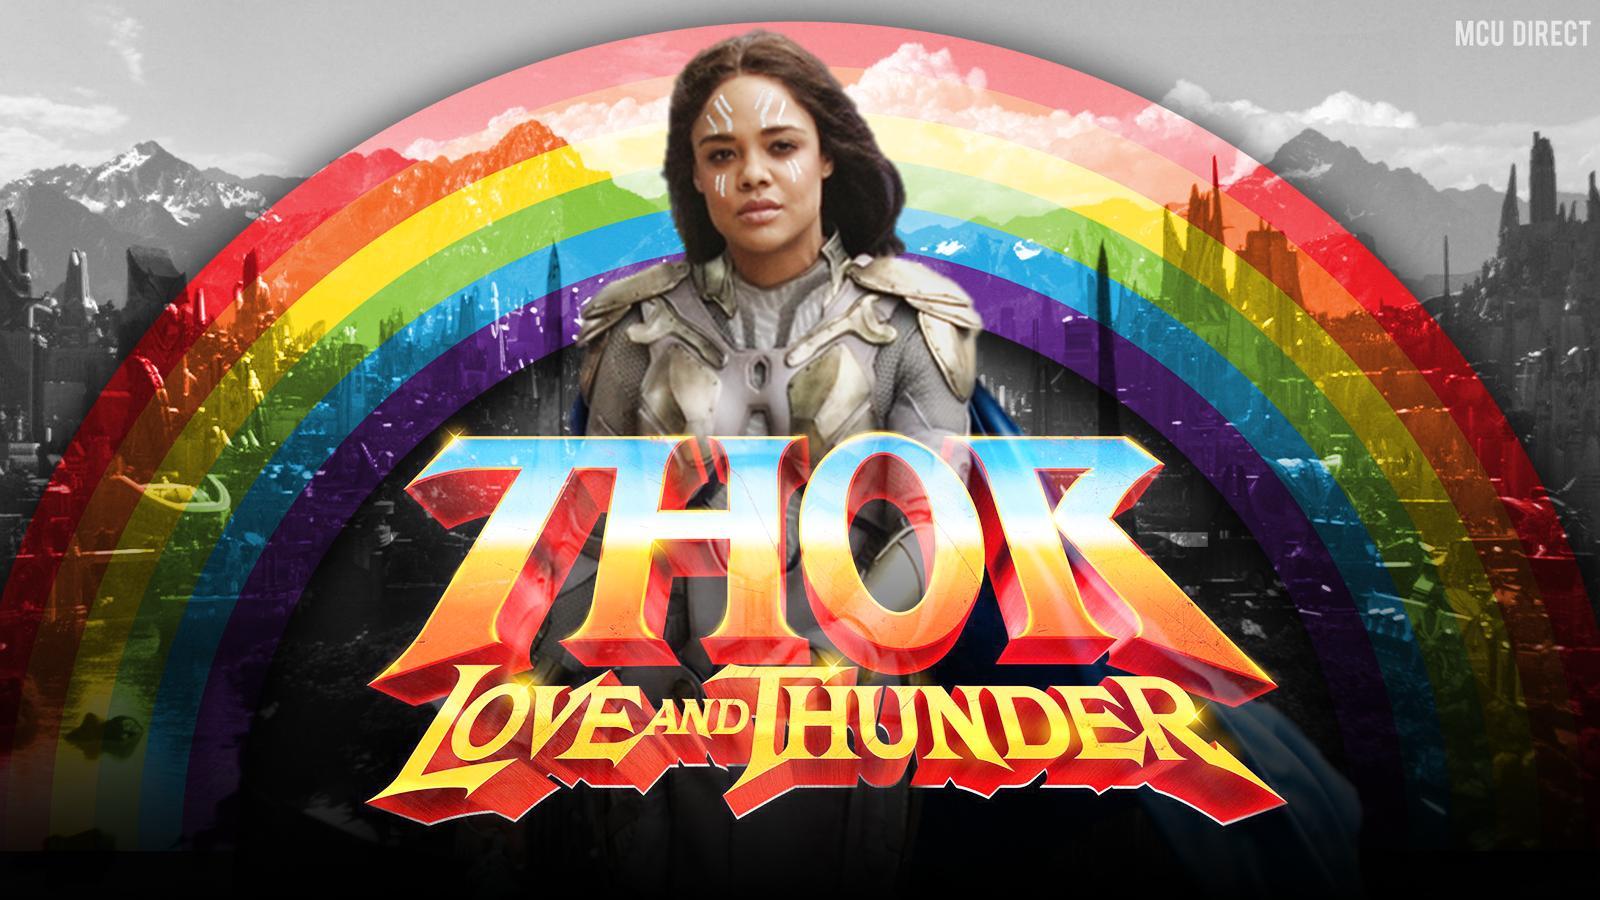 Kevin Feige Talks About Valkyrie's LGBTQ Storyline In Thor: Love